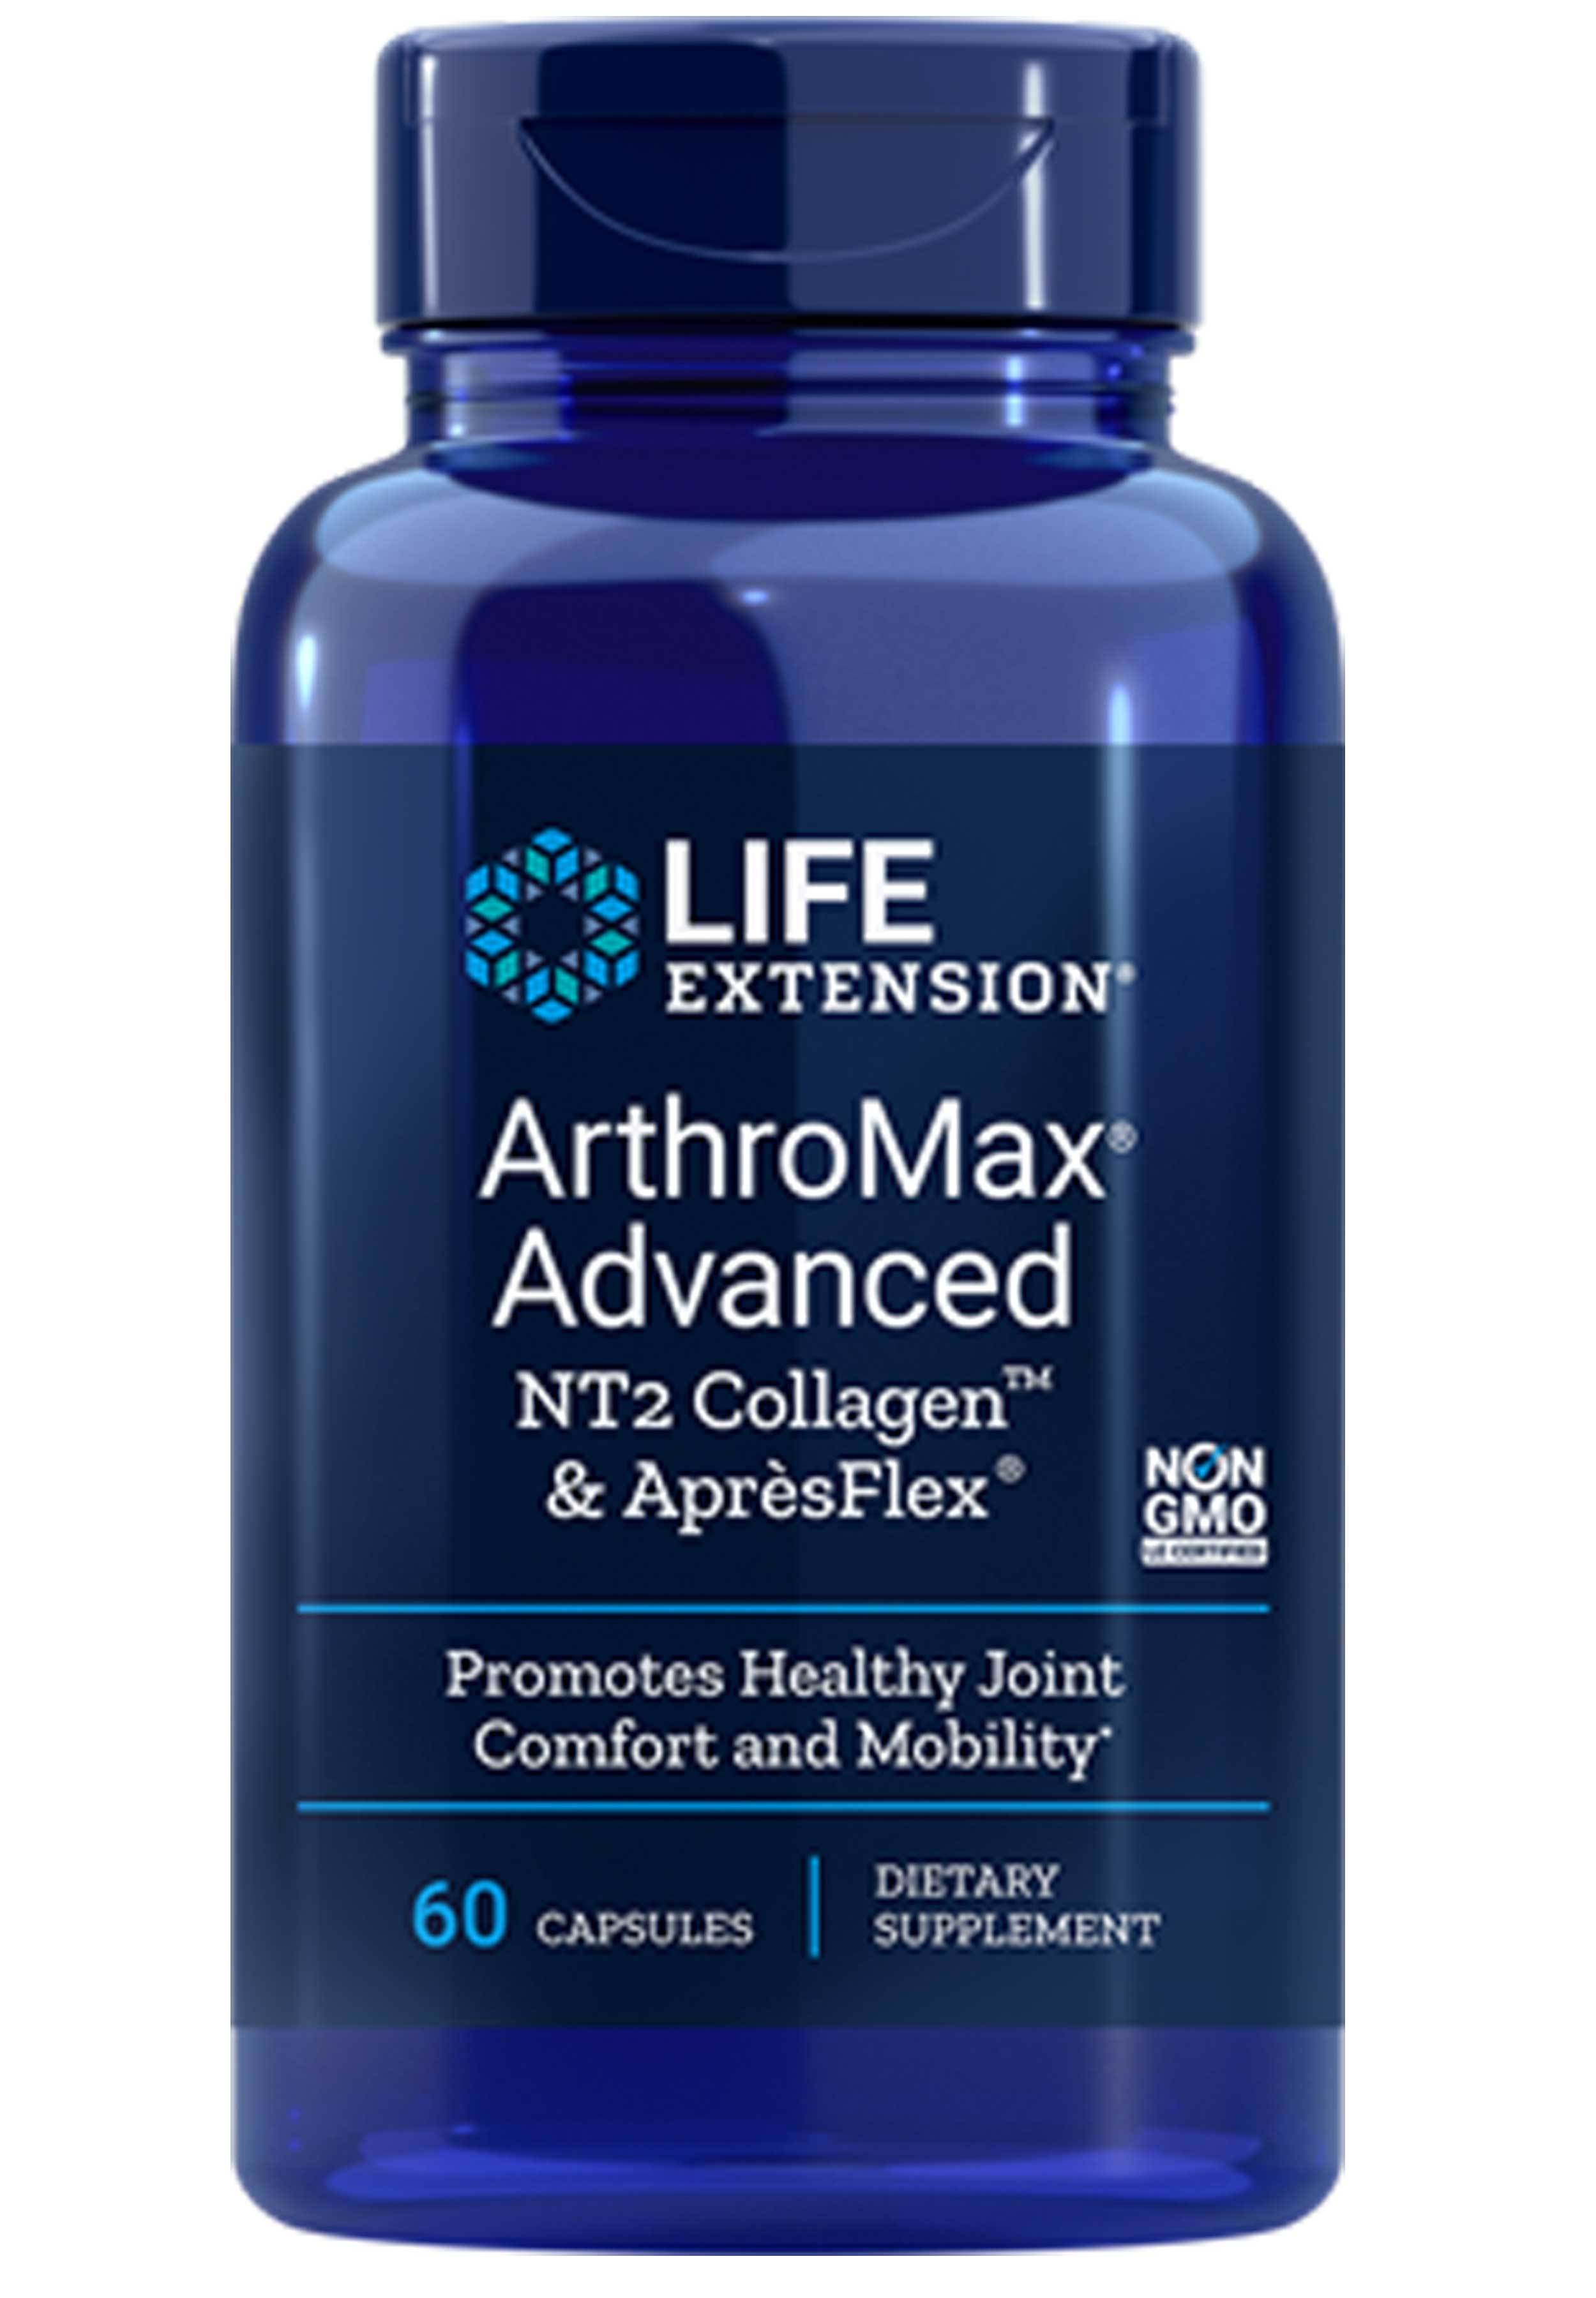 Life Extension Arthromax Advanced with NT2 Collagen